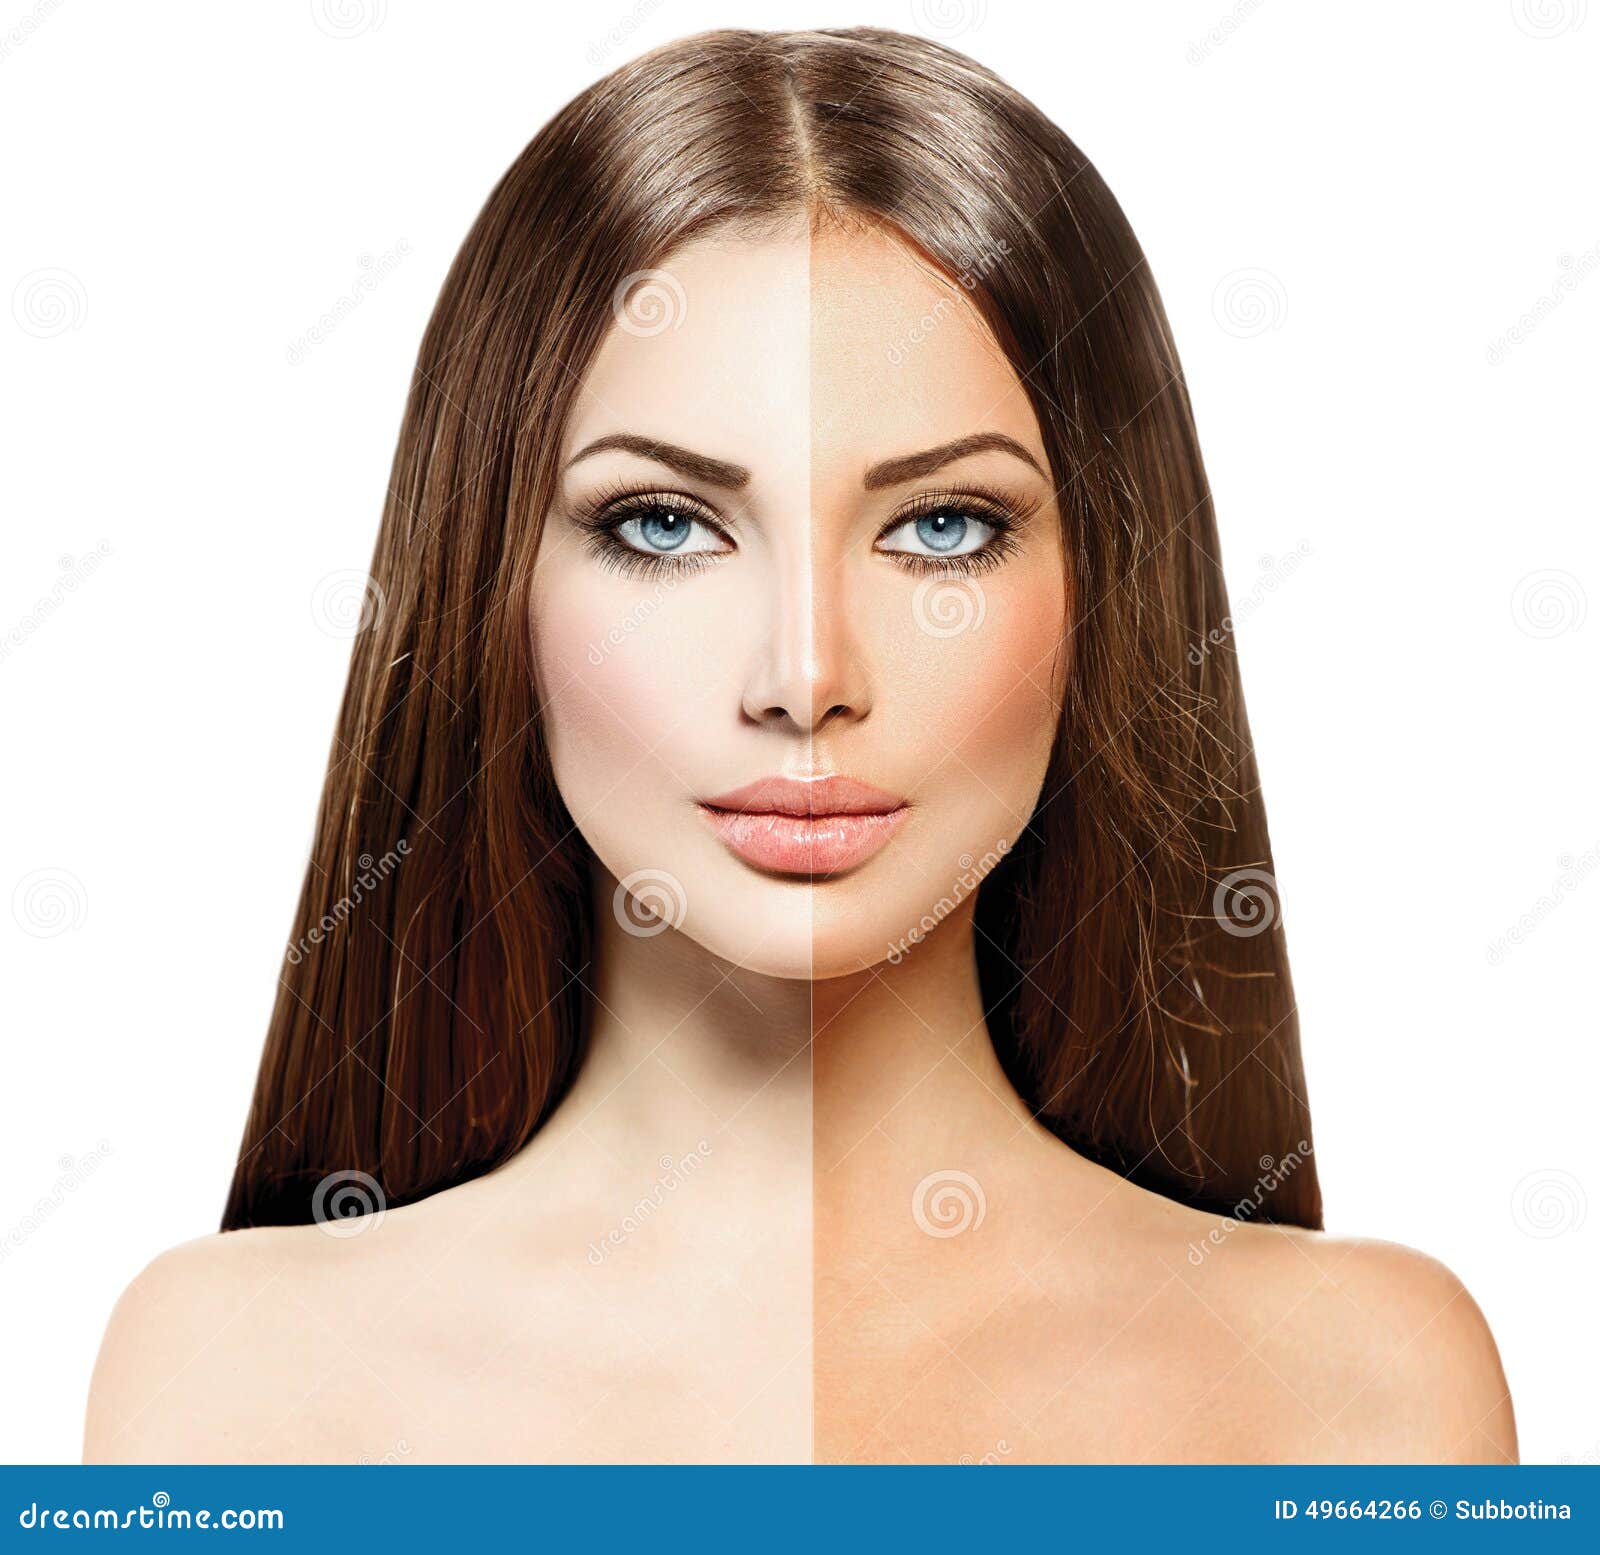 woman with tanned skin before and after tan